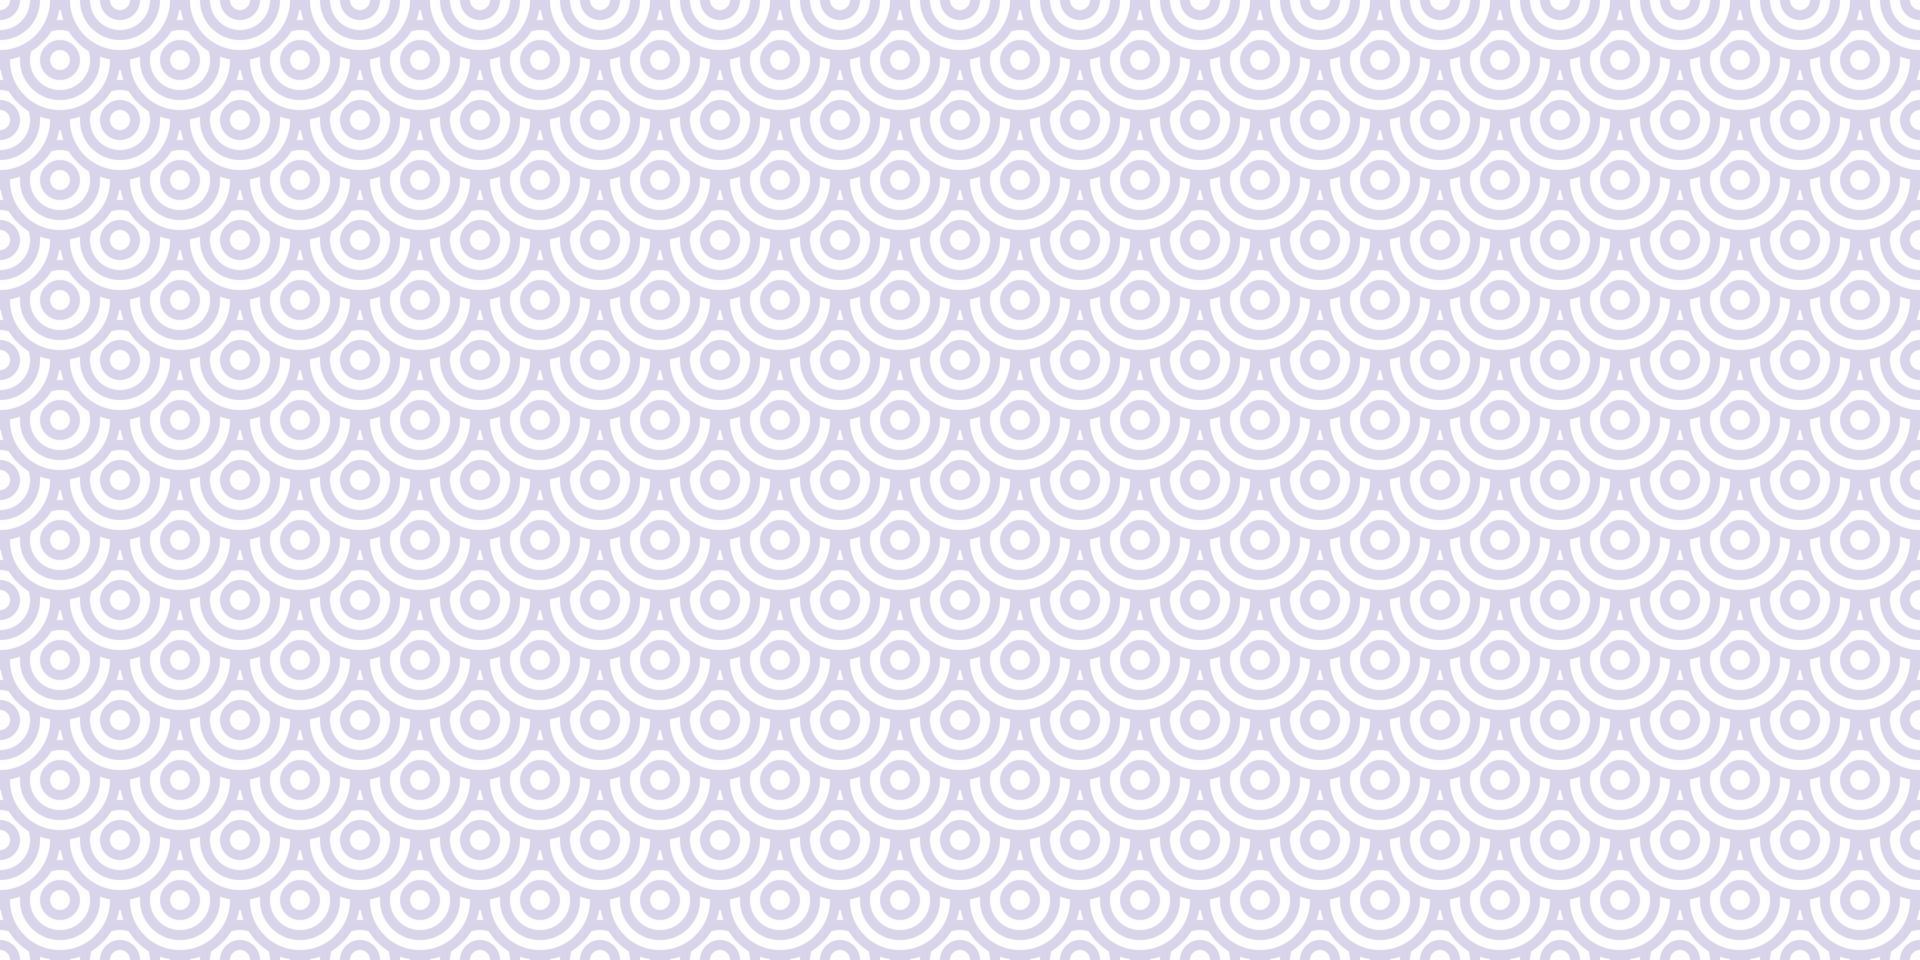 Blue and white seamless repeat pattern background. vector